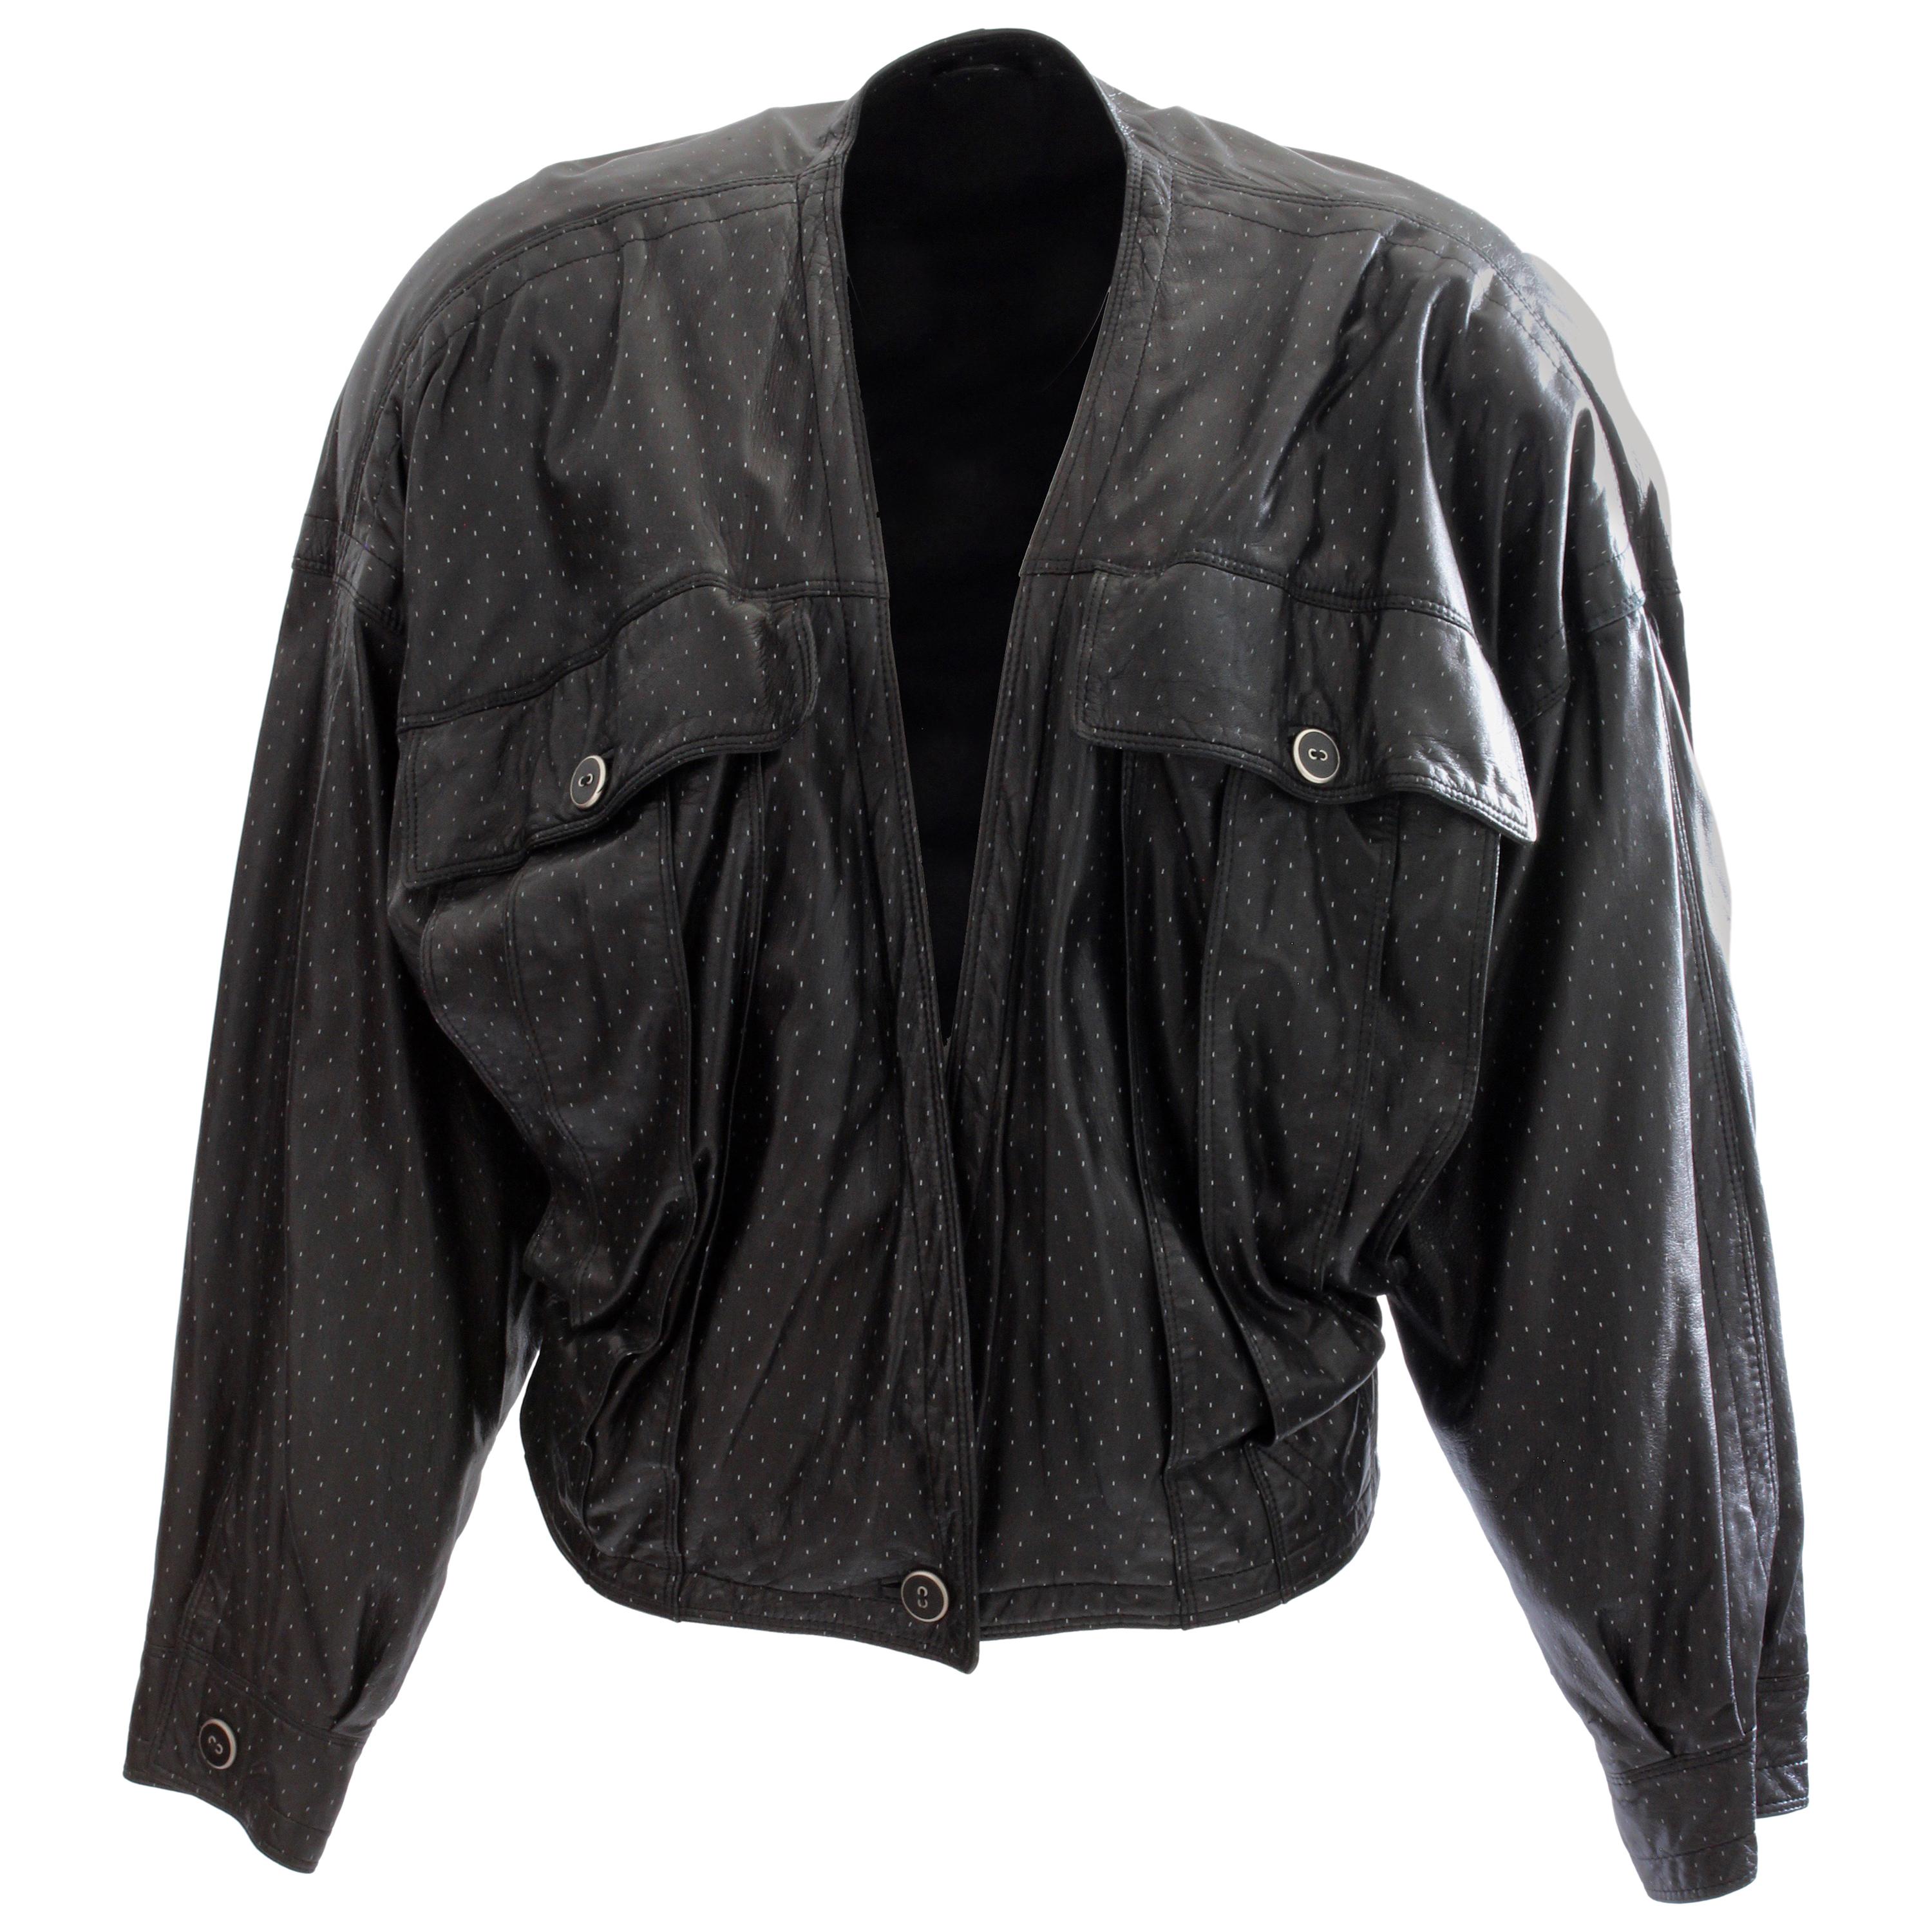 Gianni Versace Leather Bomber Jacket Black Dotted Lambskin Size M Early 90s  For Sale